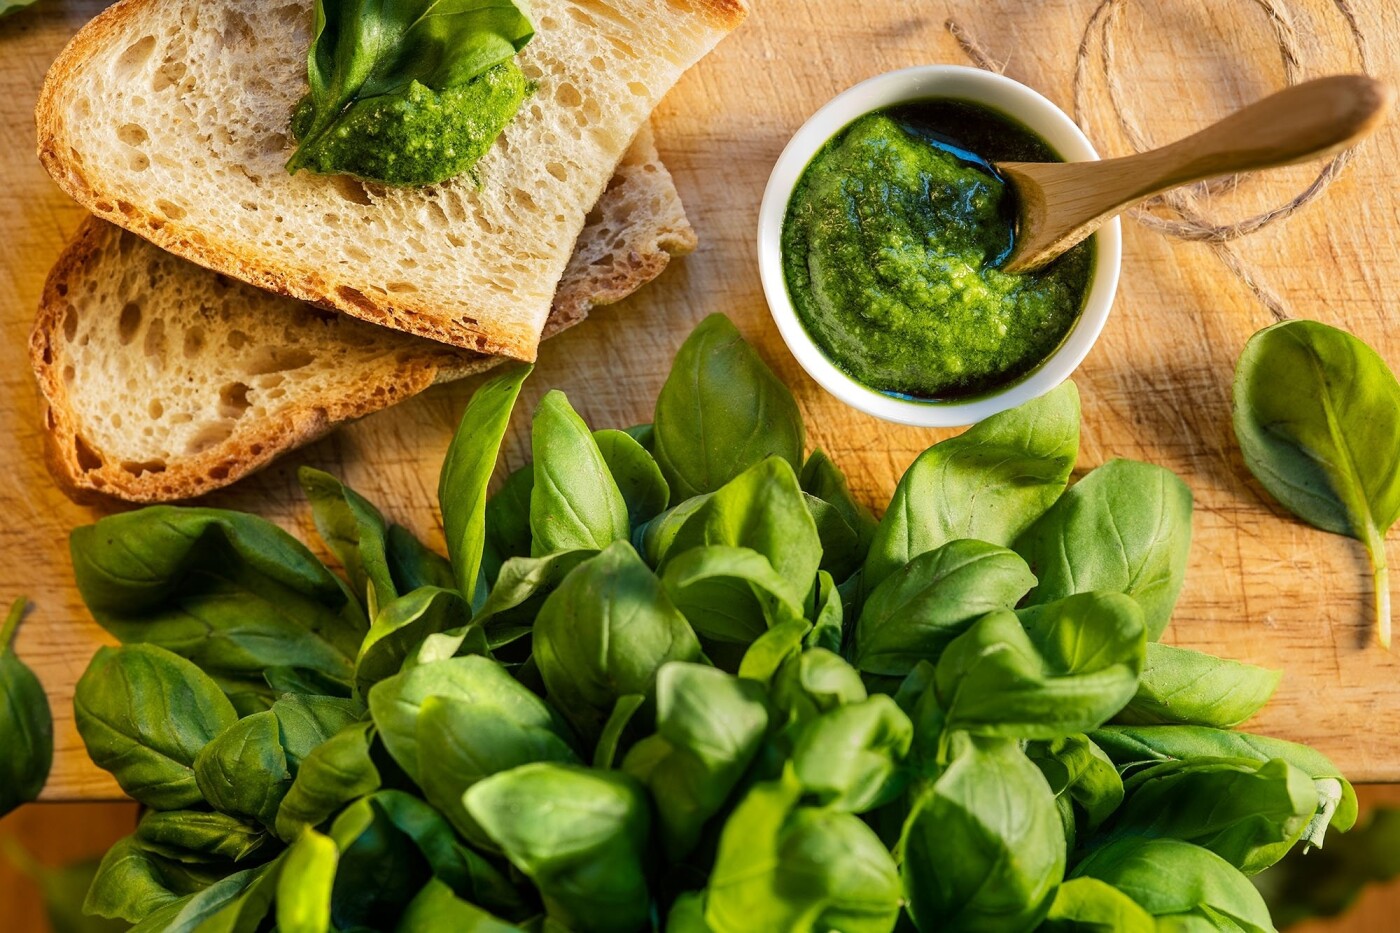 Pesto sauce (the original one from my hometown) and bread: a perfect match...